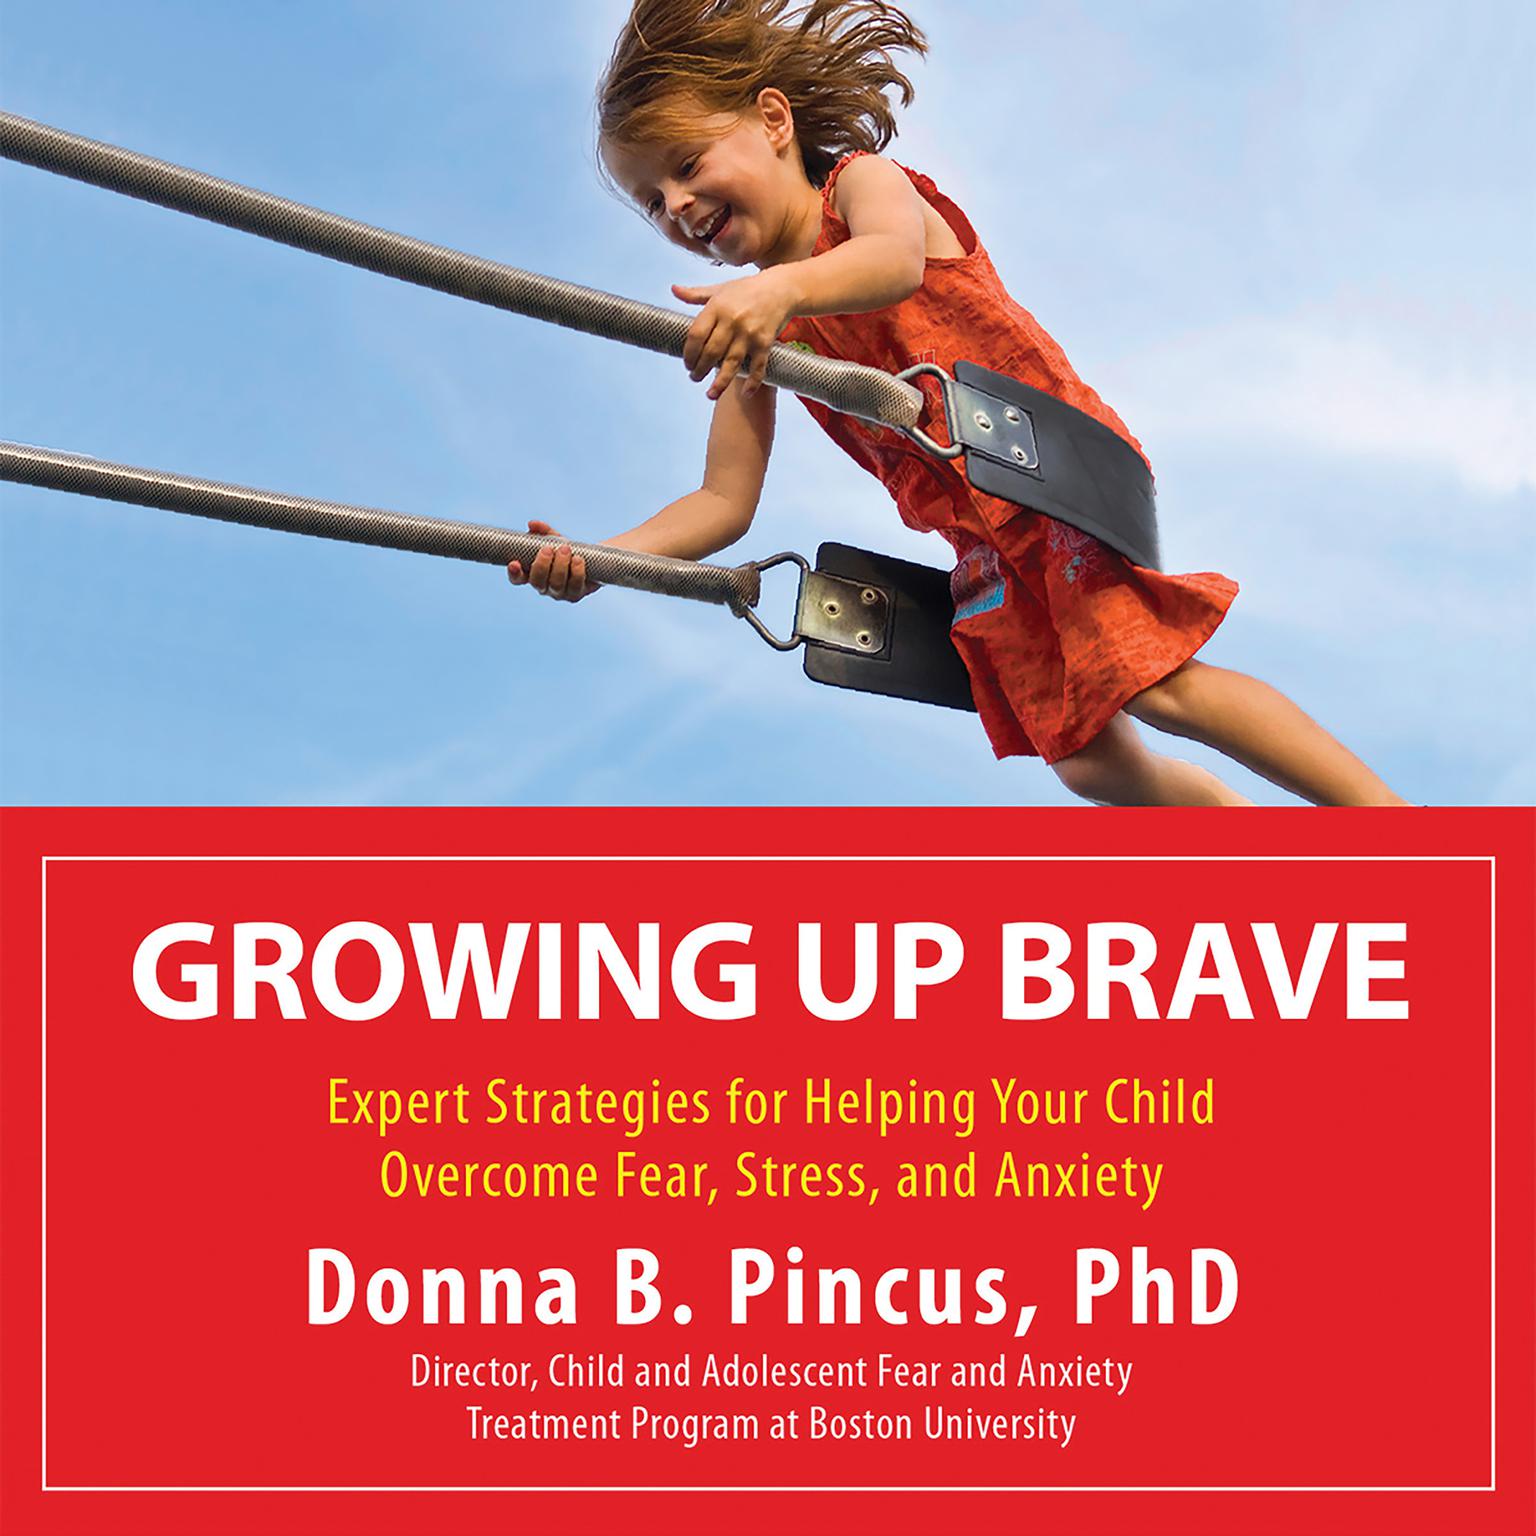 Growing Up Brave: Expert Strategies for Helping Your Child Overcome Fear, Stress, and Anxiety Audiobook, by Donna B. Pincus